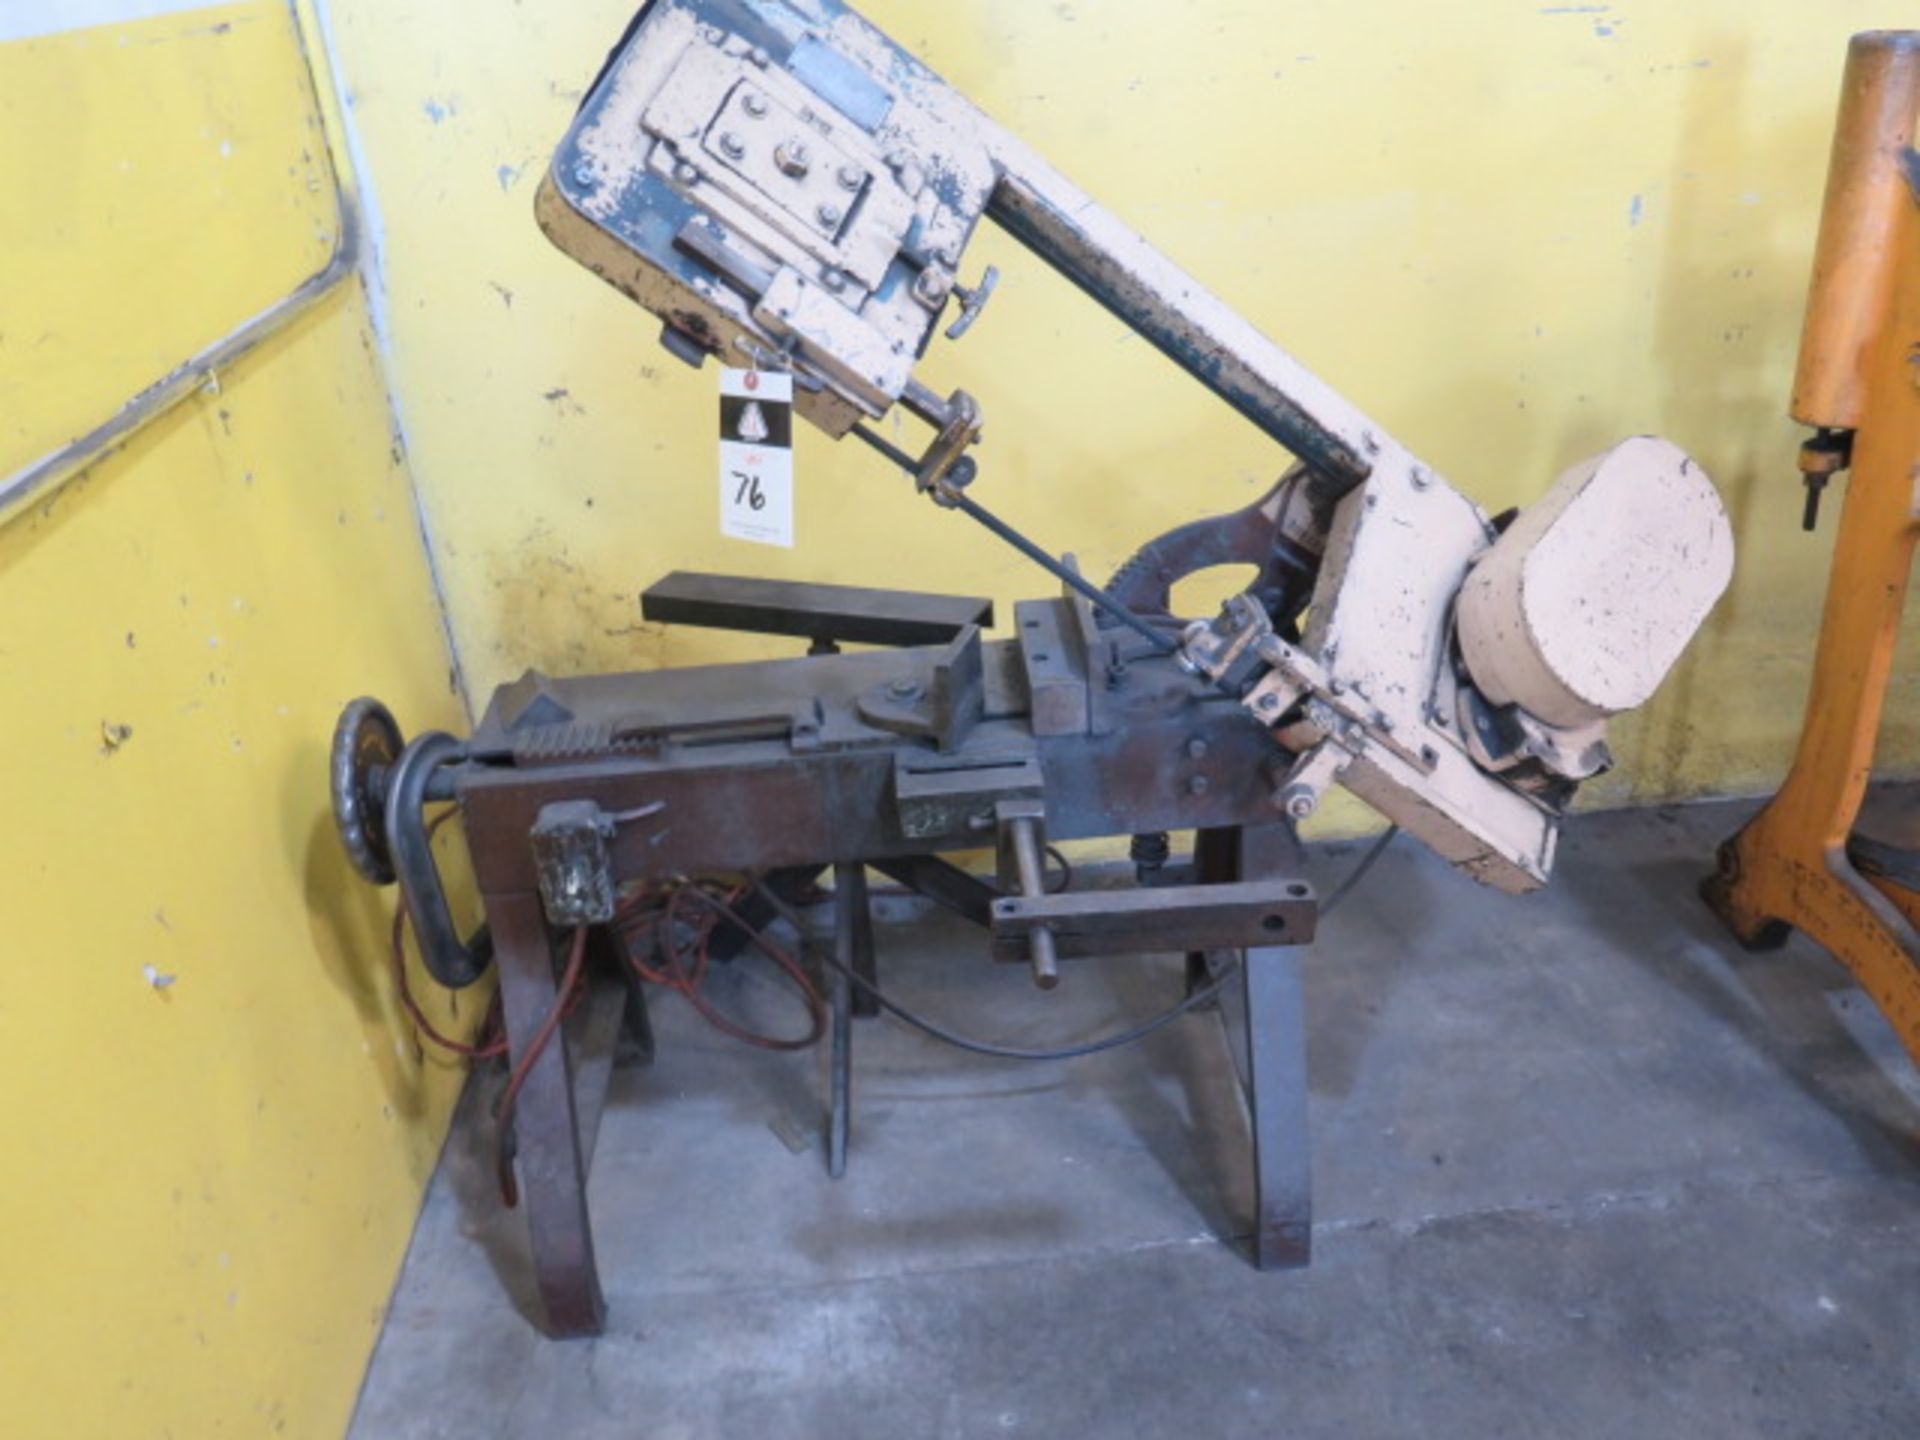 Wells mdl. 58B Horizontal Band Saw s/n 1221 w/ Manual Clamping, Work Stop (SOLD AS-IS - NO